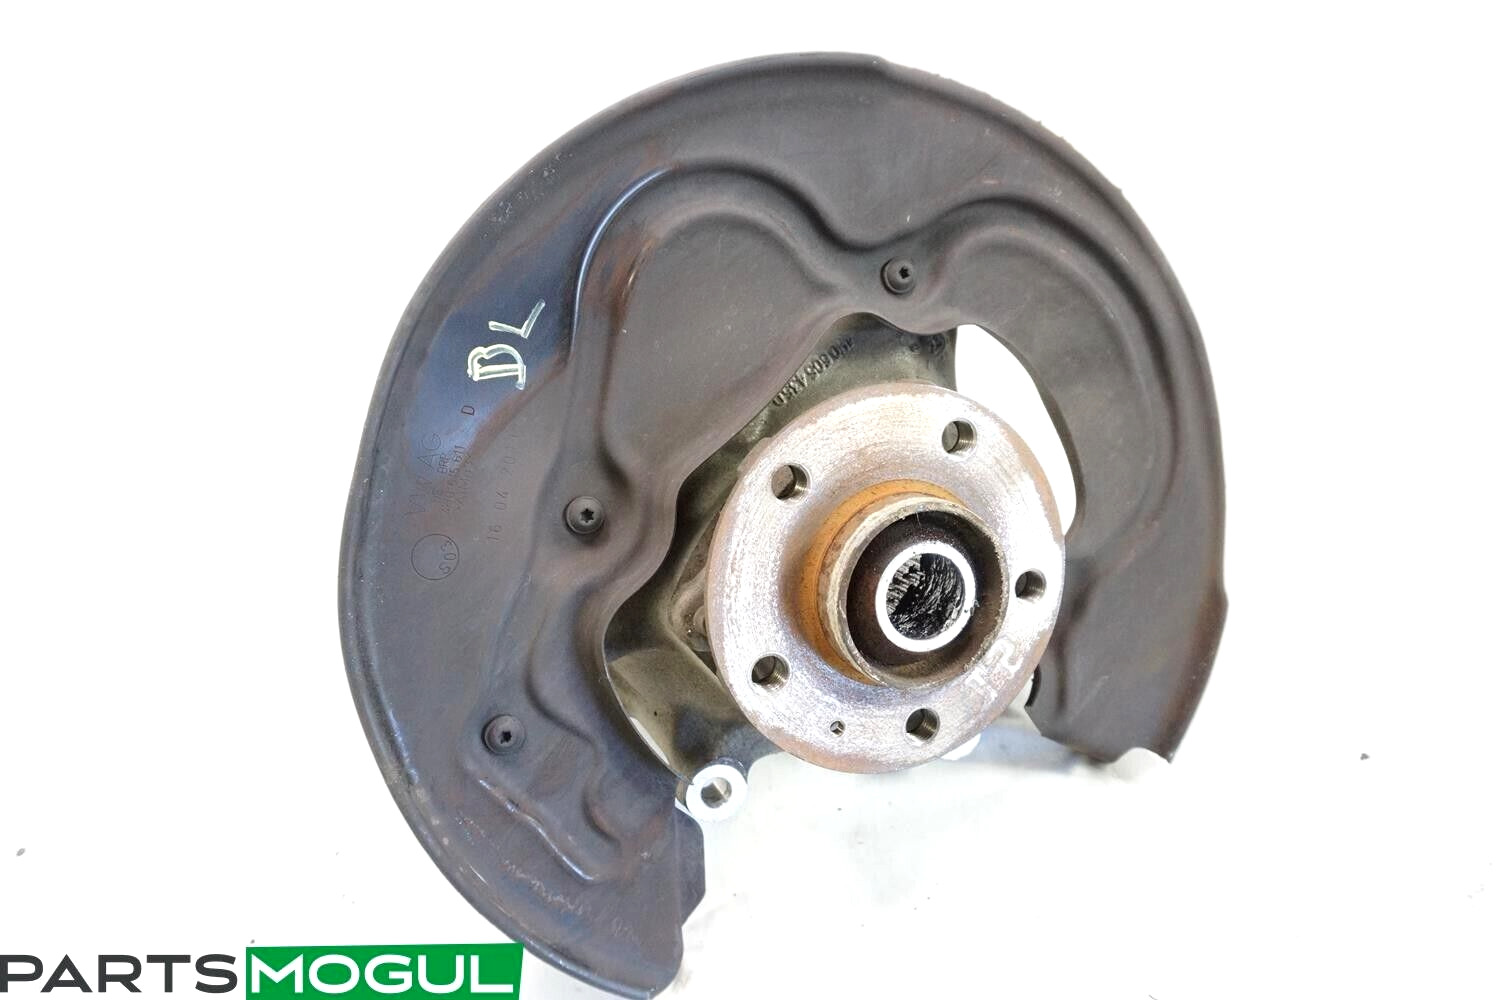 2011-2012 AUDI A8 QUATTRO REAR LEFT Spindle Knuckle W/ Wheel Bearing